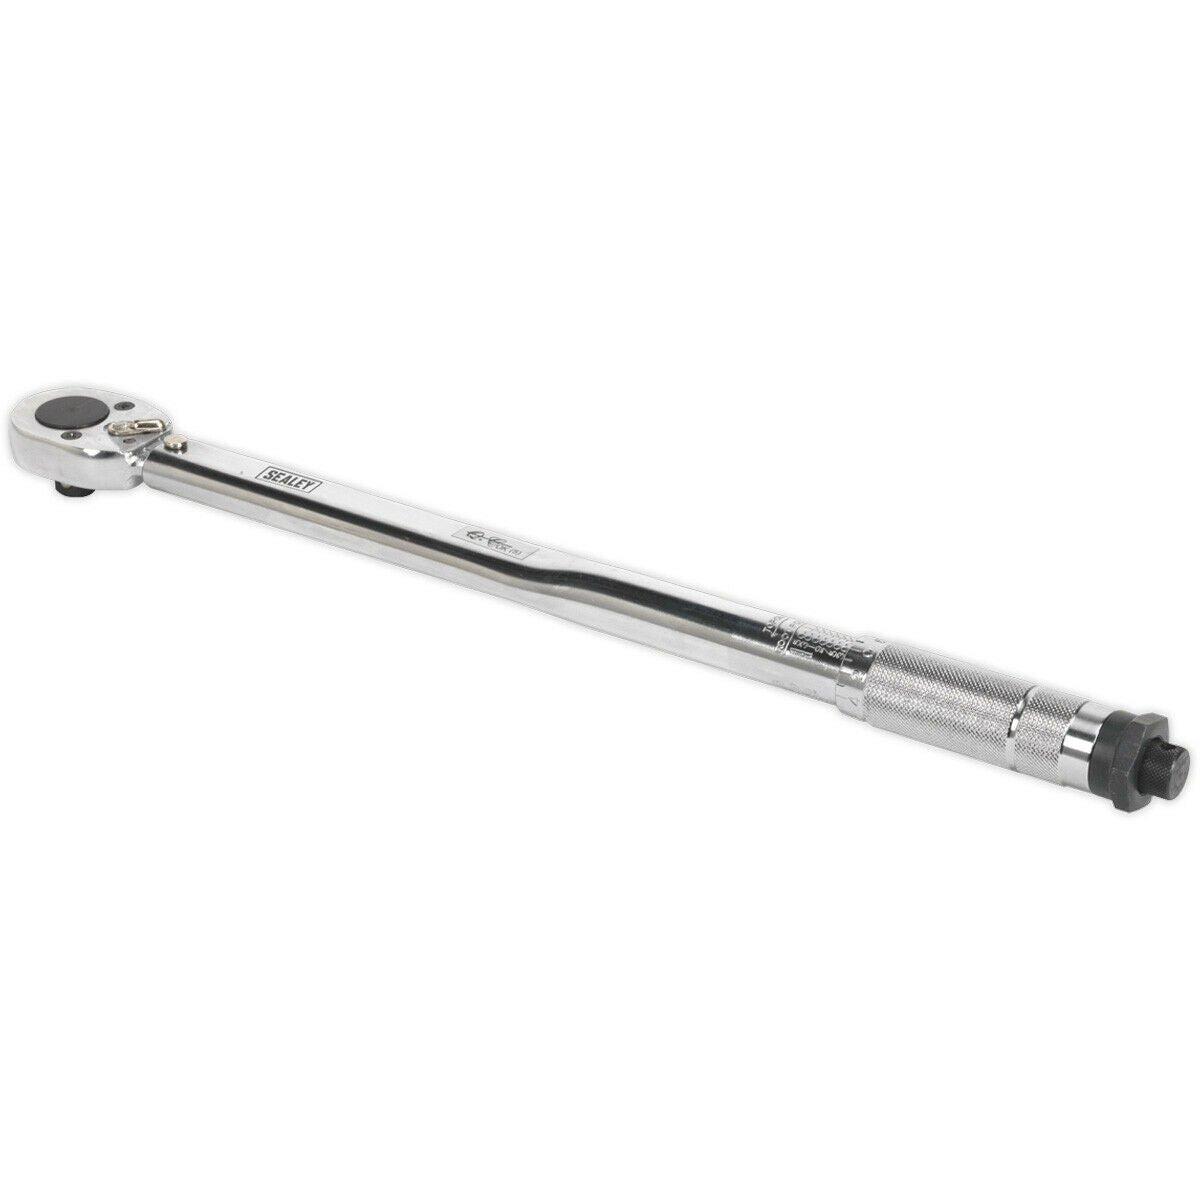 Micrometer Torque Wrench - 1/2